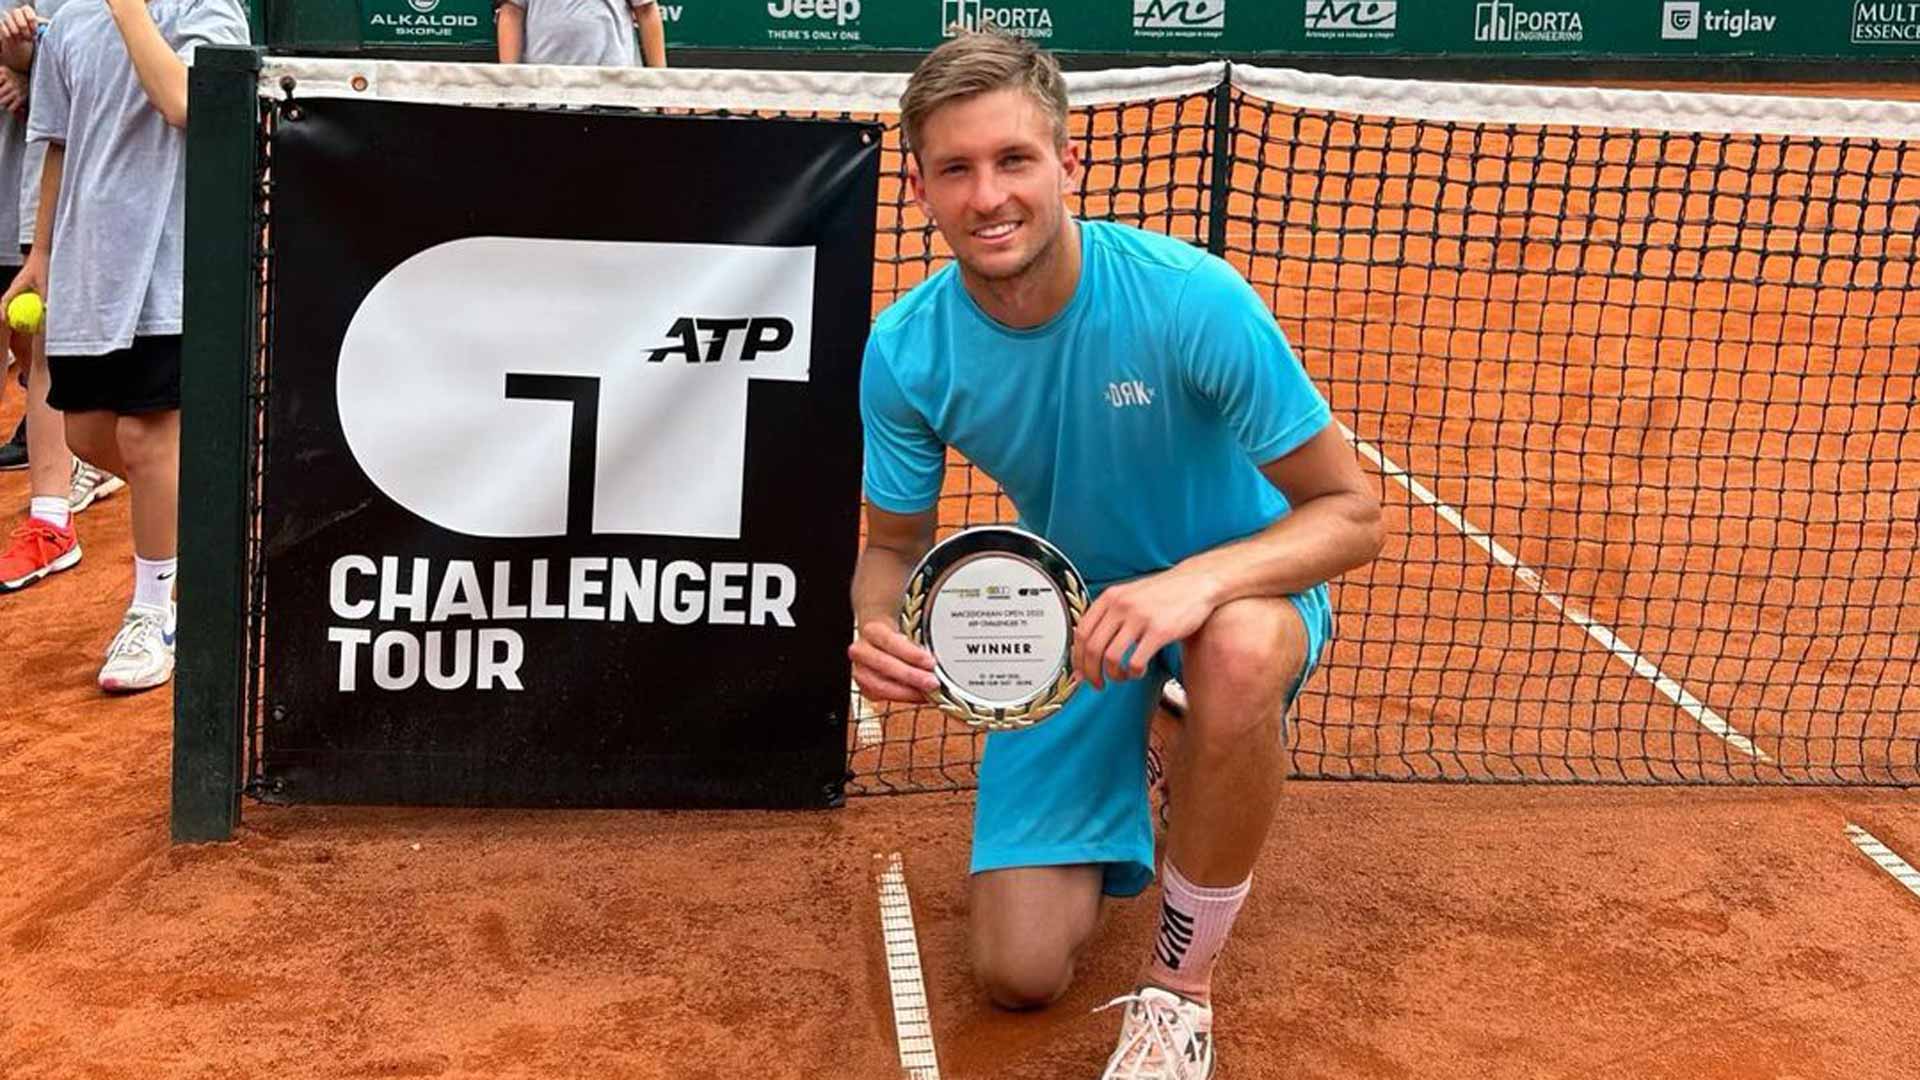 Victory For Valkusz: Hungarian Claims Maiden Challenger Title In Skopje